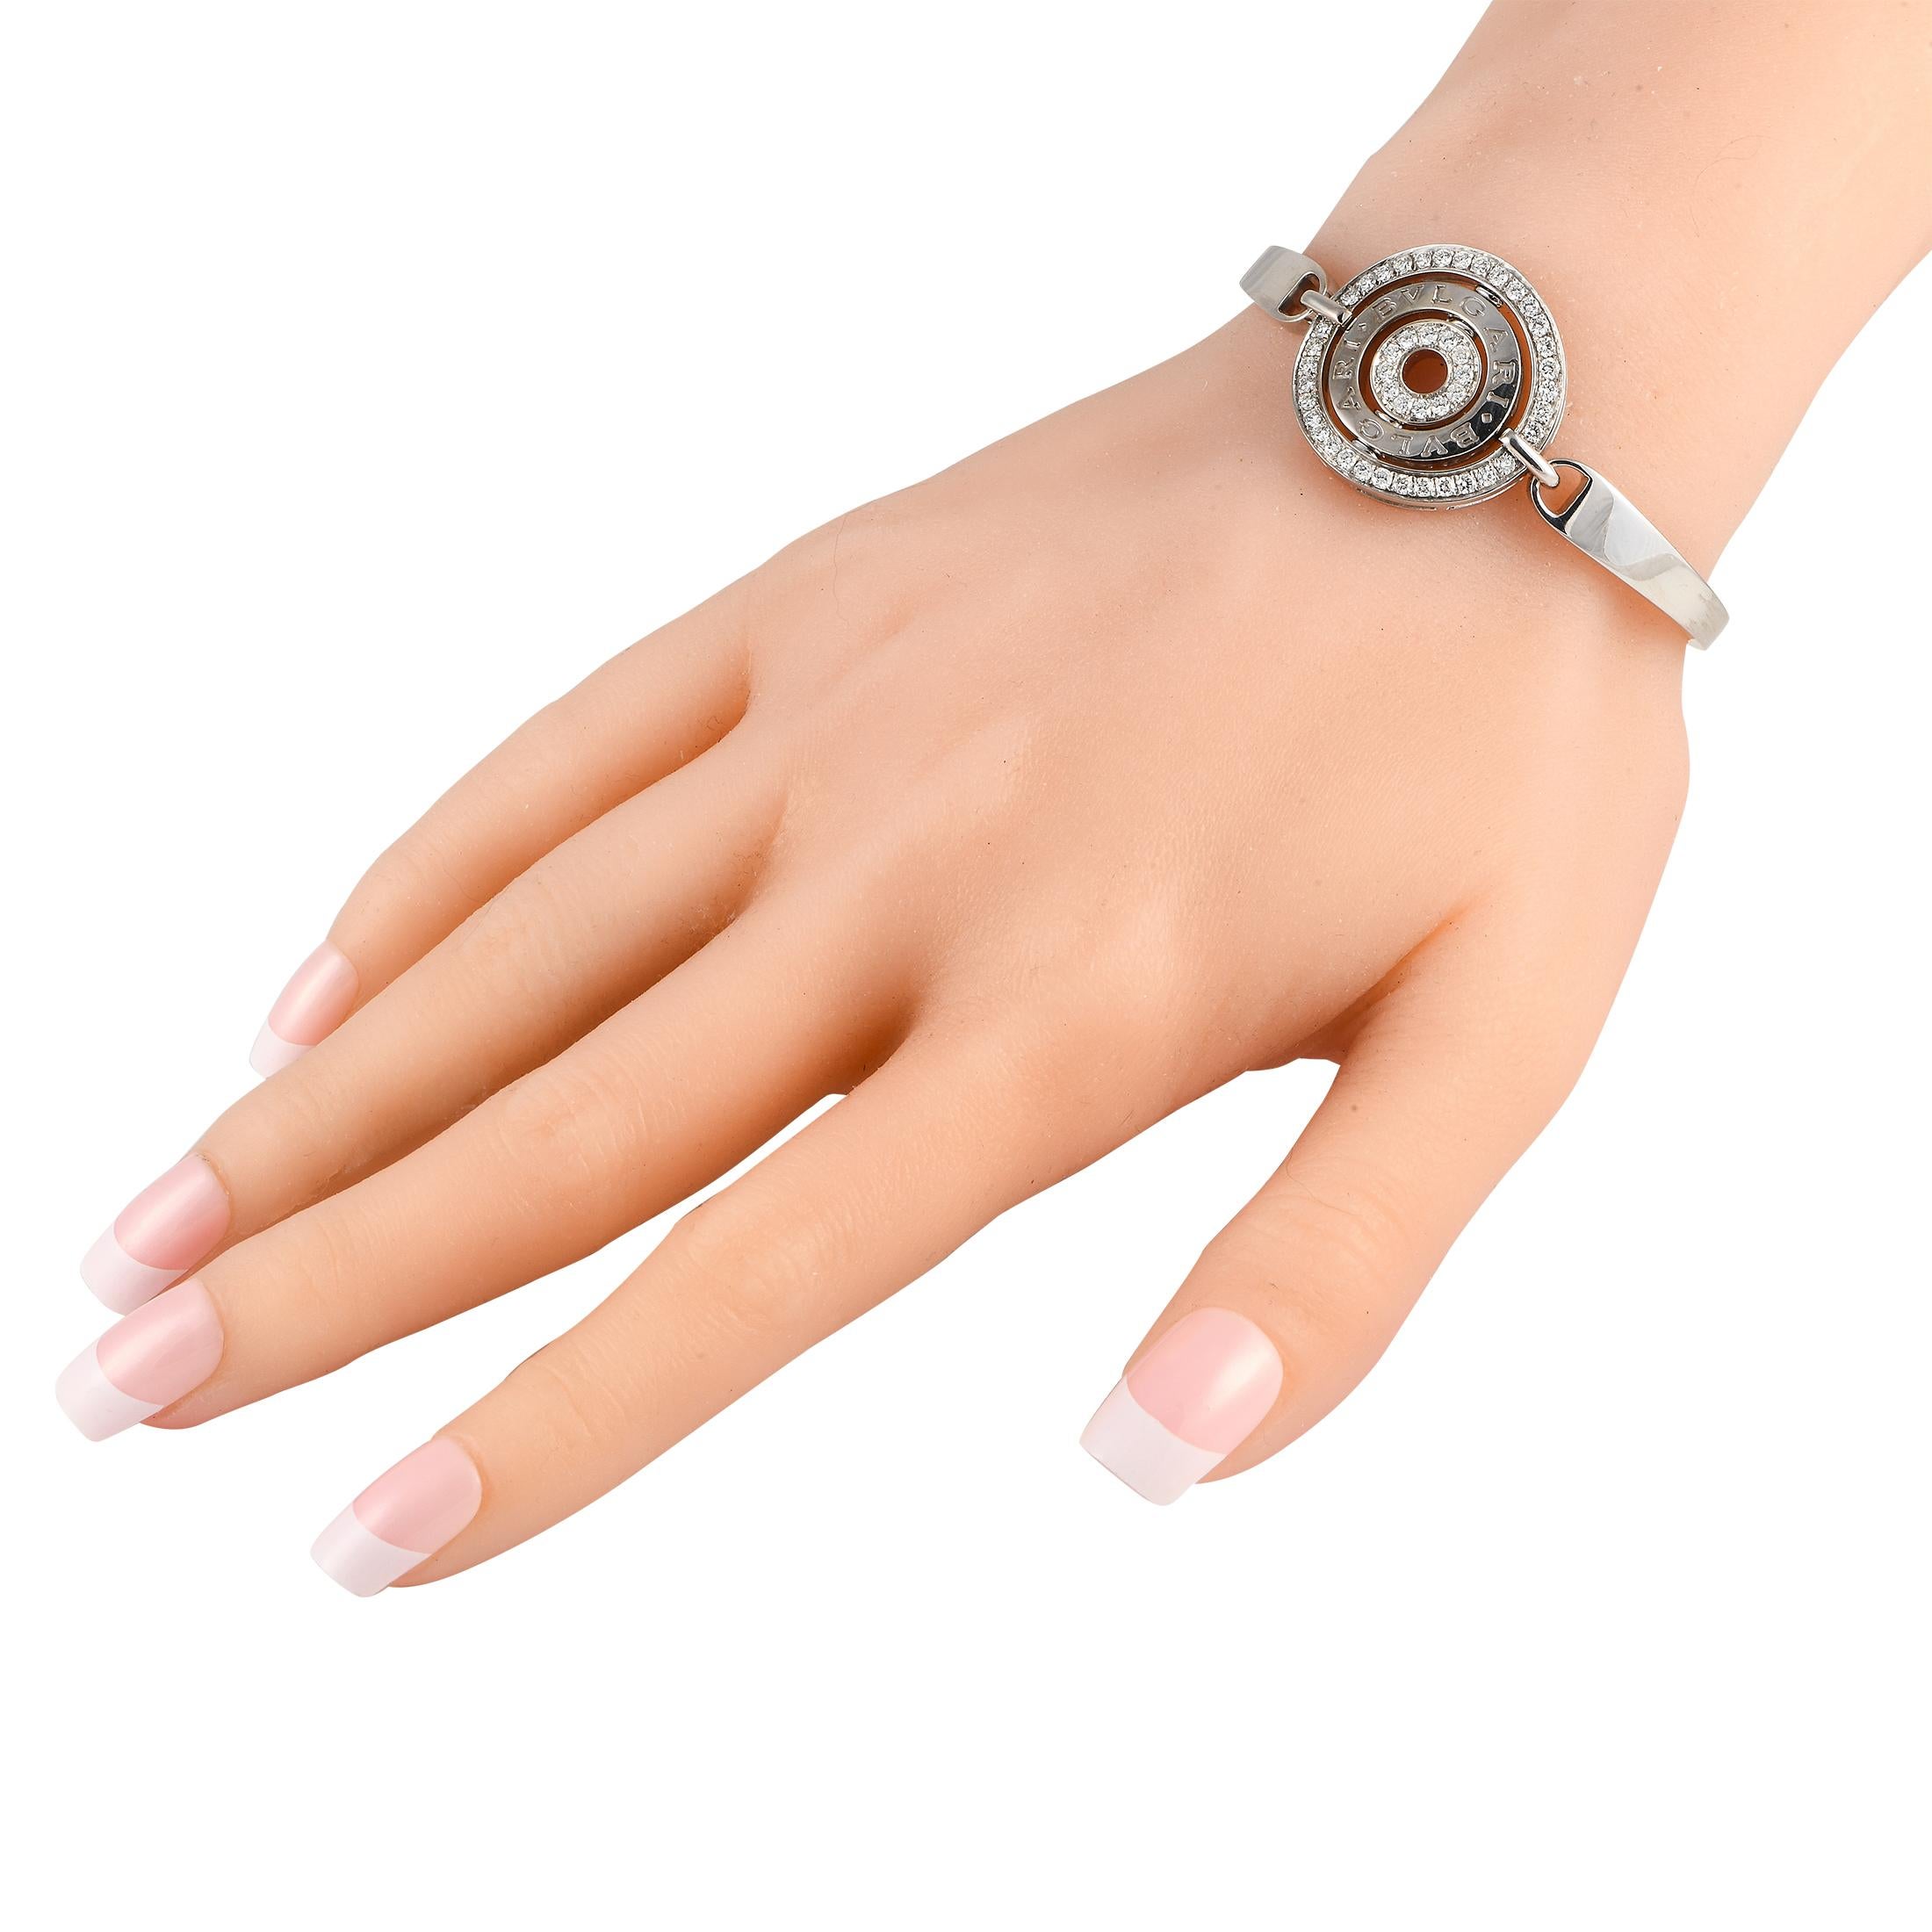 This Bvlgari Astrale Cerchi bracelet is a luxury piece with an iconic sense of style. At the center of this pieces sleek 18K White Gold setting, youll find a circular centerpiece featuring the brands signature and sparkling Diamonds totaling 1.40